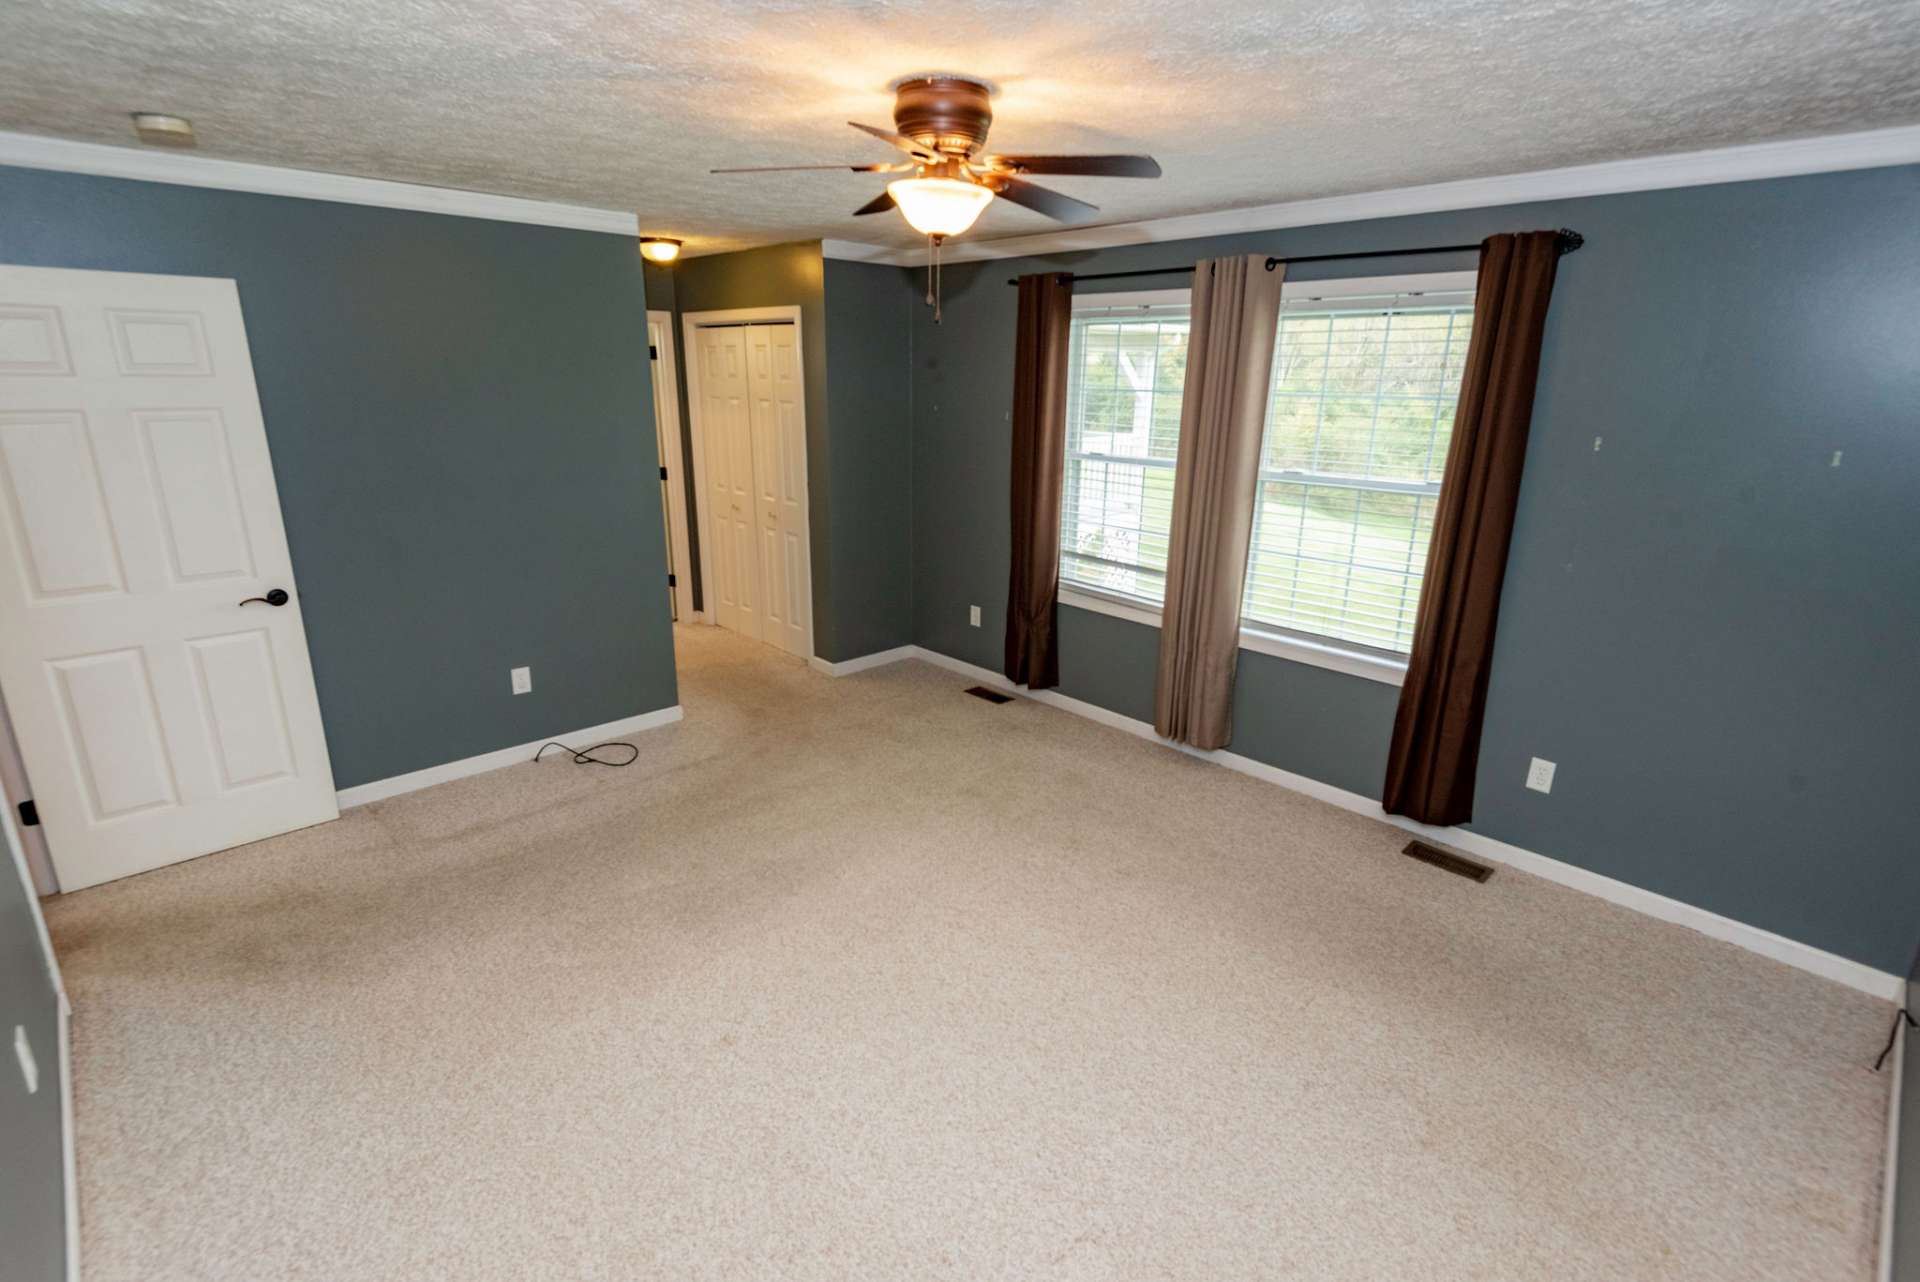 You will fall in love with this master suite with large walk-in closet and private bath!